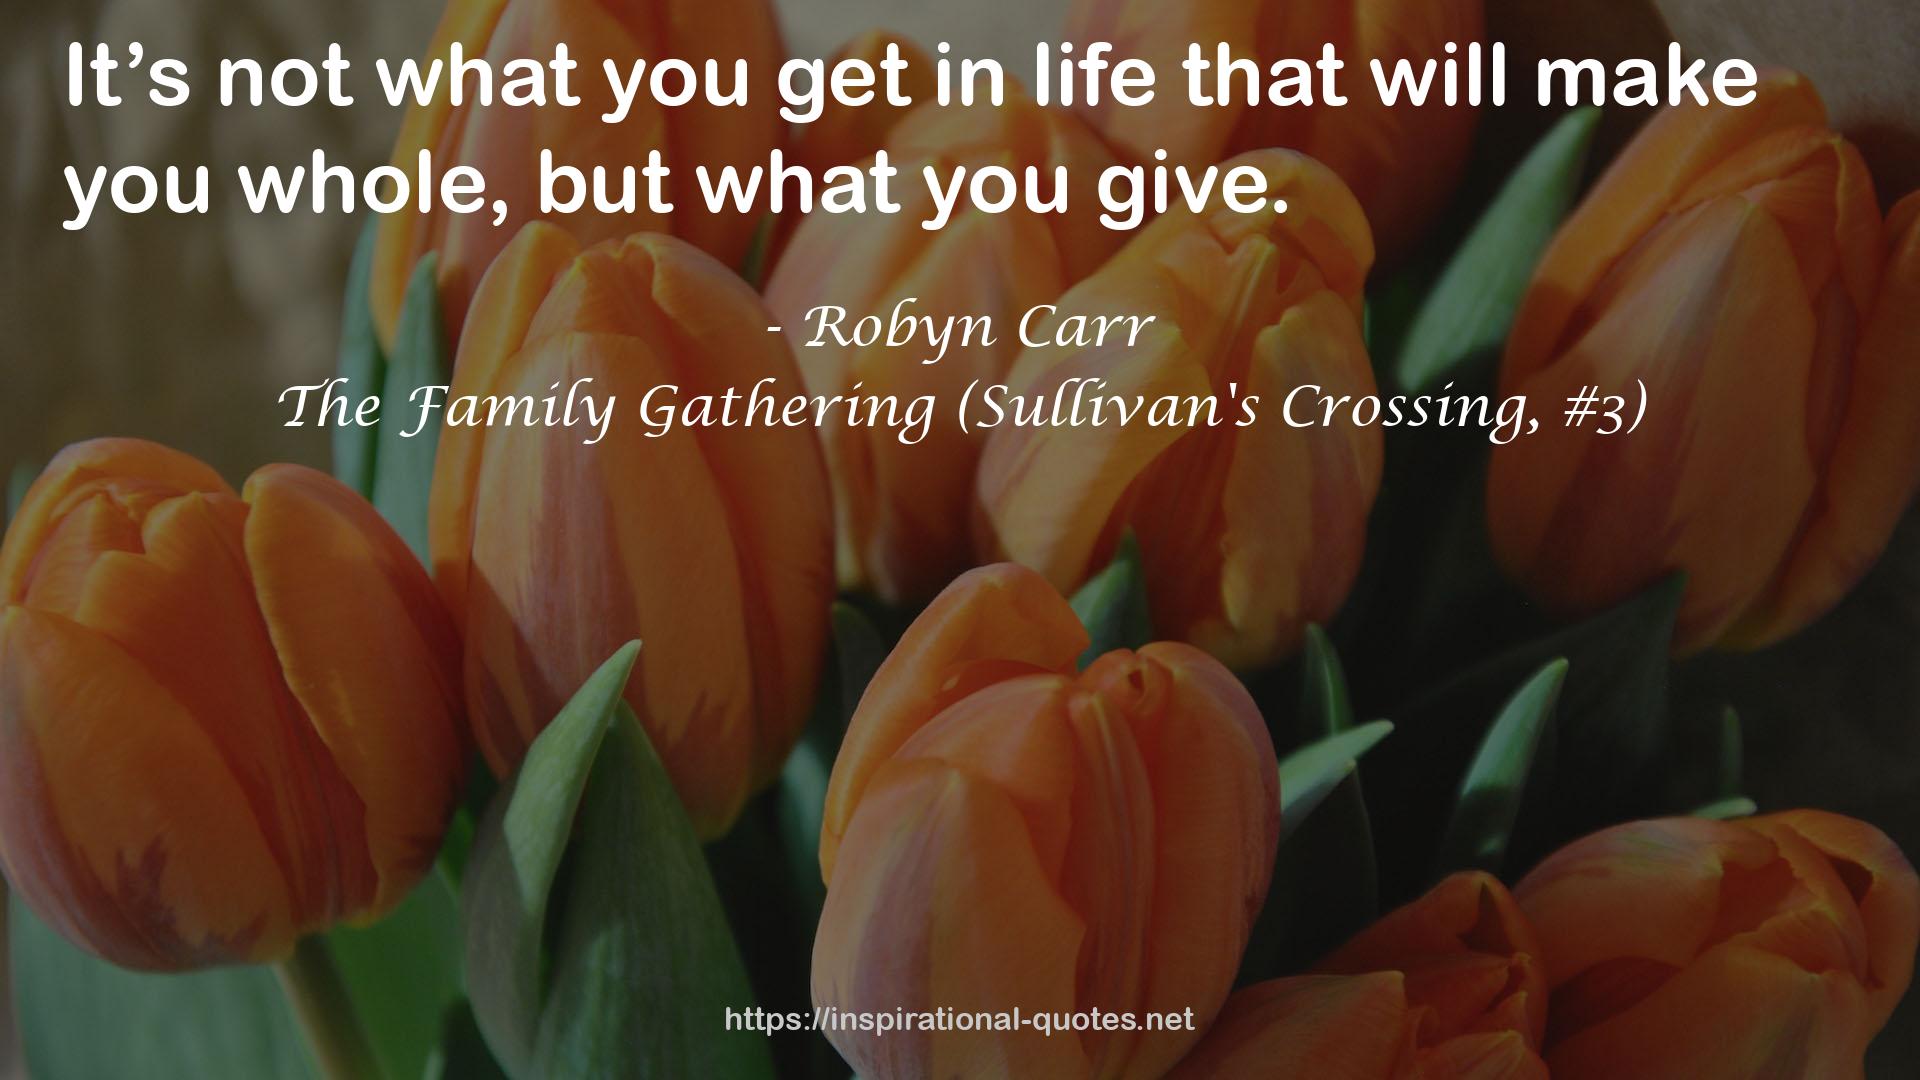 The Family Gathering (Sullivan's Crossing, #3) QUOTES